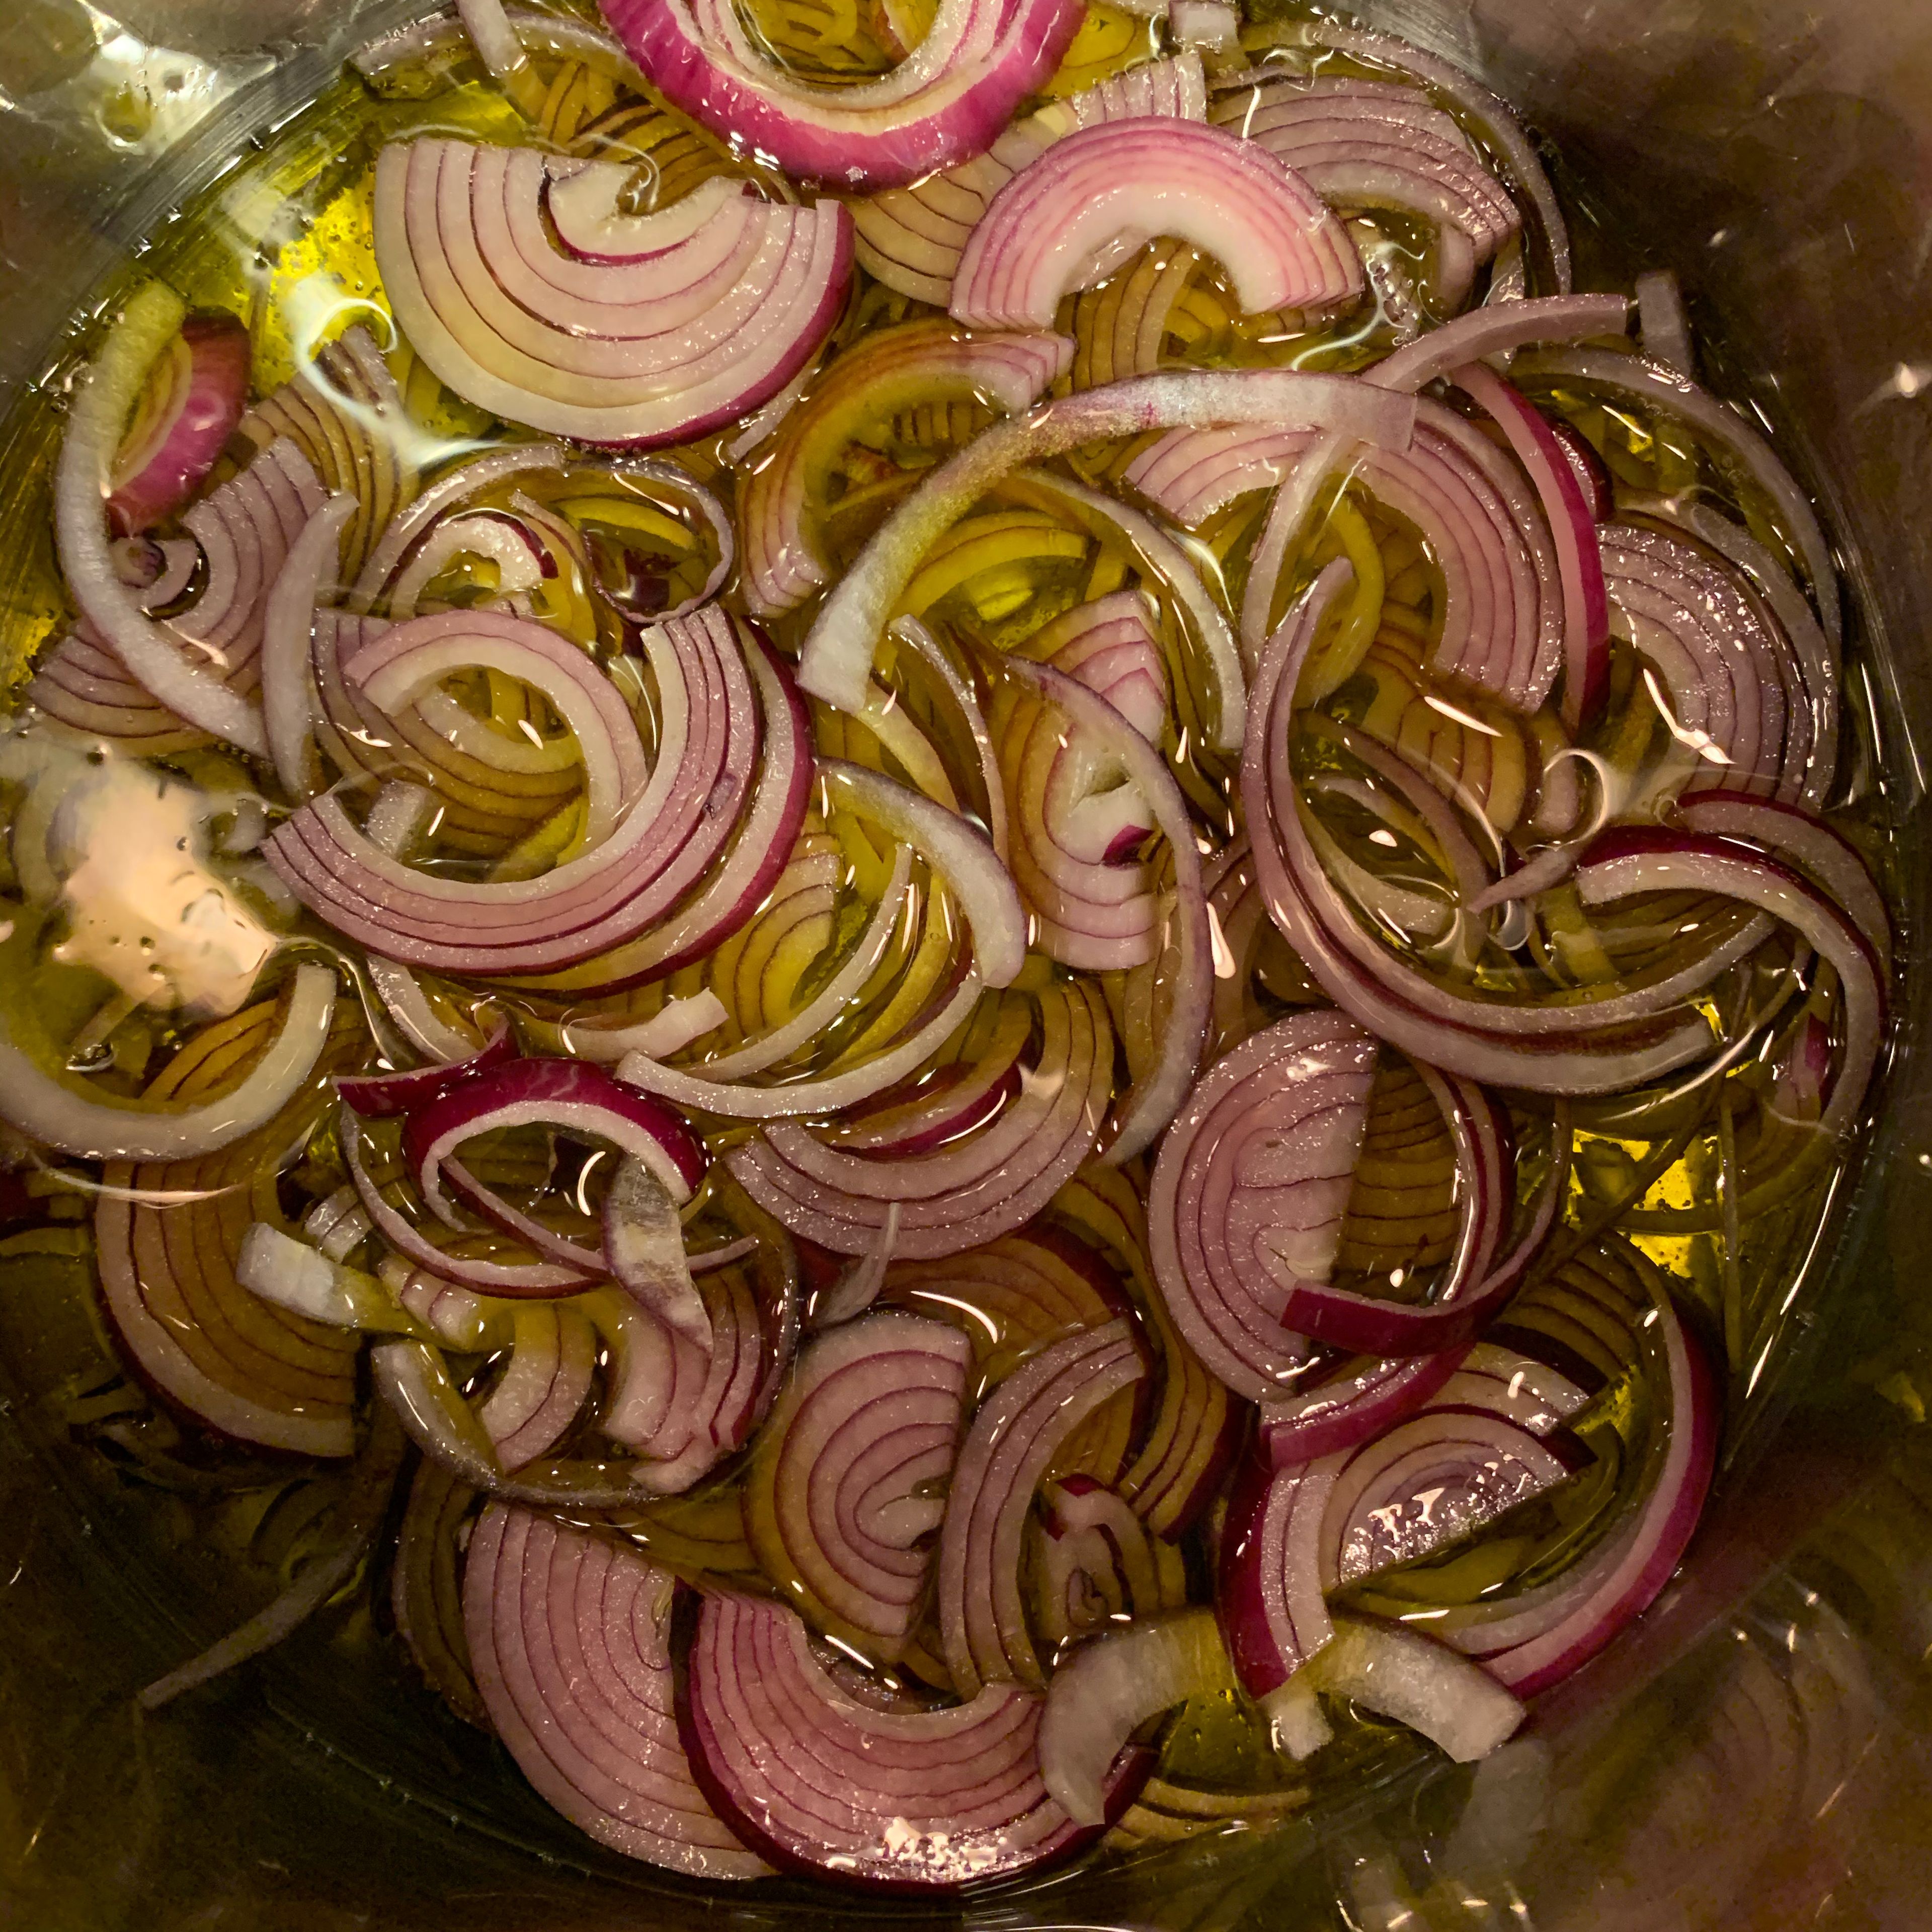 Use a generous amount of extra virgin olive oil, about 1 inch from the bottom of the pot. Set on medium heat. Throw in sliced onions, raise heat to medium high, cover pan and get the onions going. Once they are boiling in the oil lower the heat to medium low.